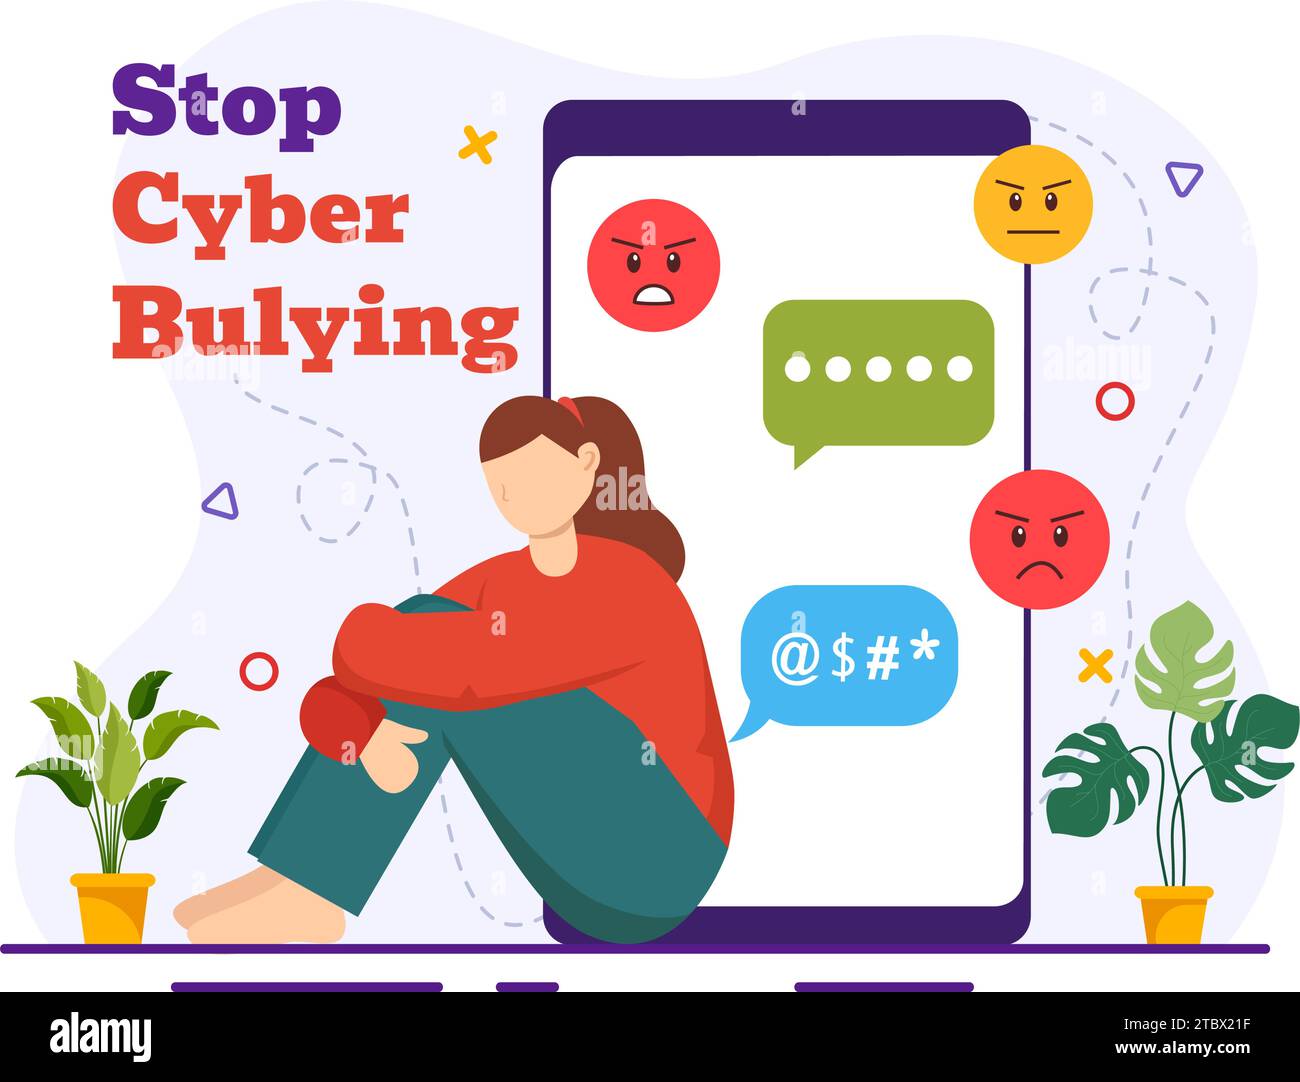 Stop Cyberbullying Vector Illustration of Haters Online with Bullying Internet, Trolling and Hate Speech in Flat Cartoon Background Design Stock Vector